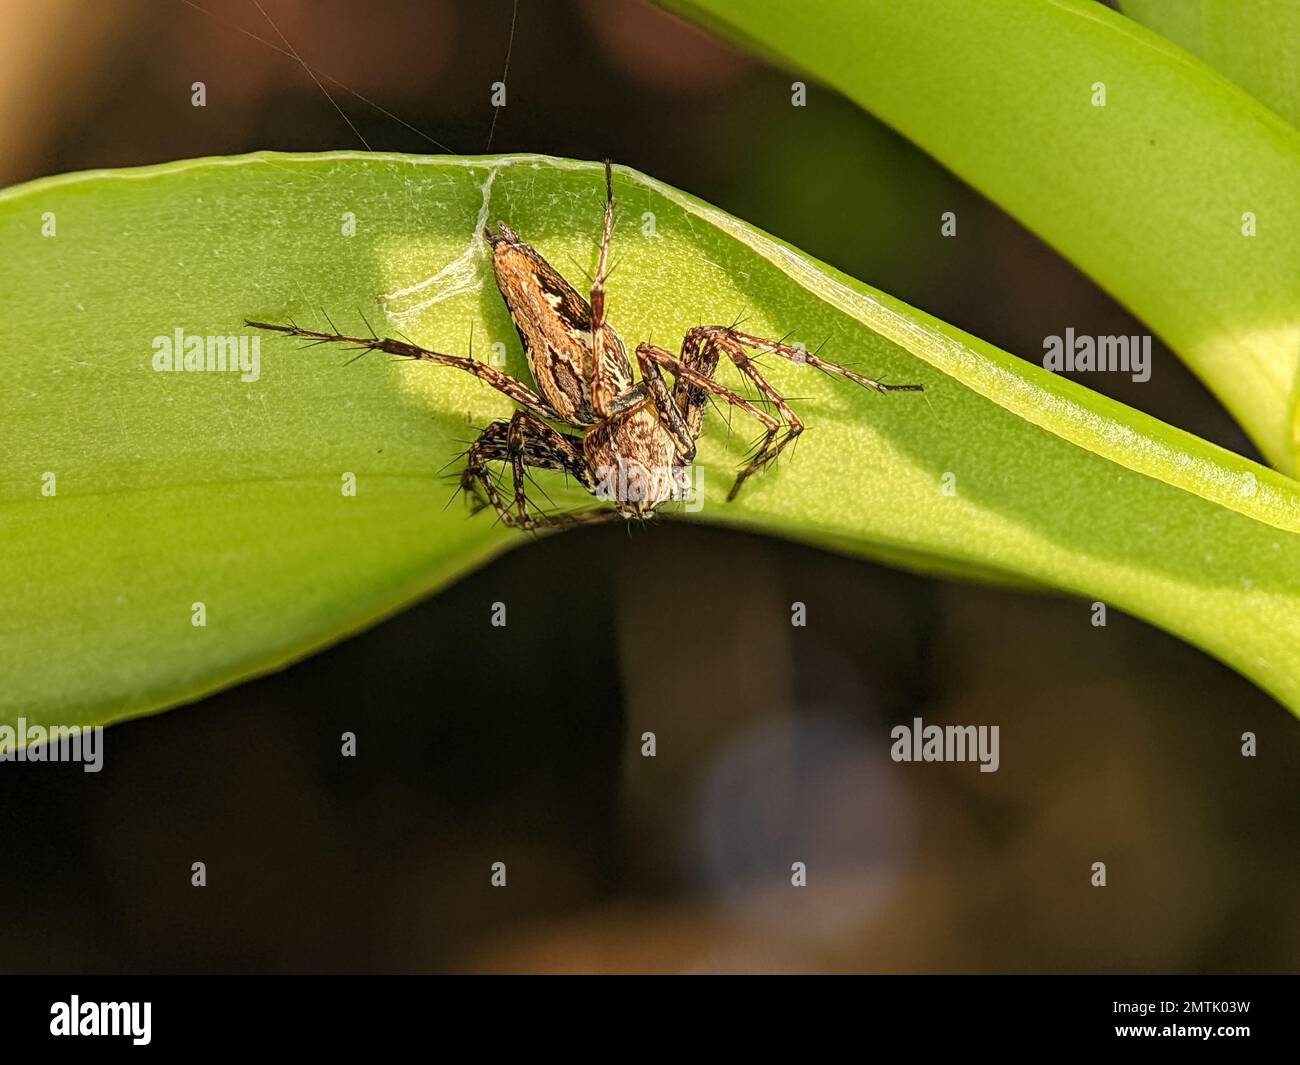 Big jumping spider on a leaf getting ready to pounce on prey in the form of insects Stock Photo